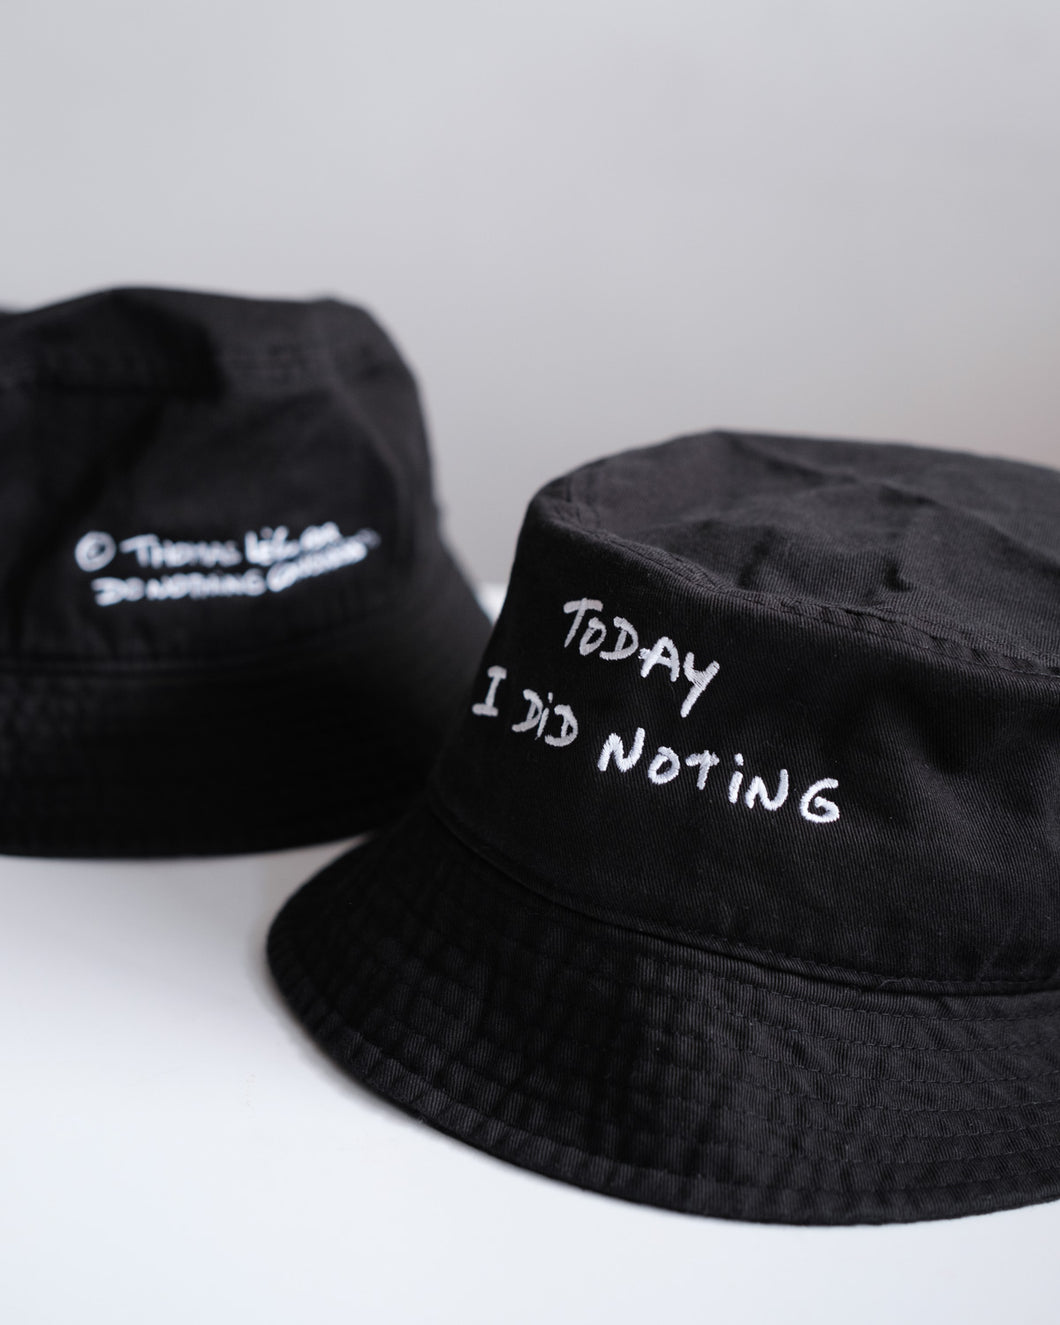 Bucket Hat :  TODAY I DID NOTING